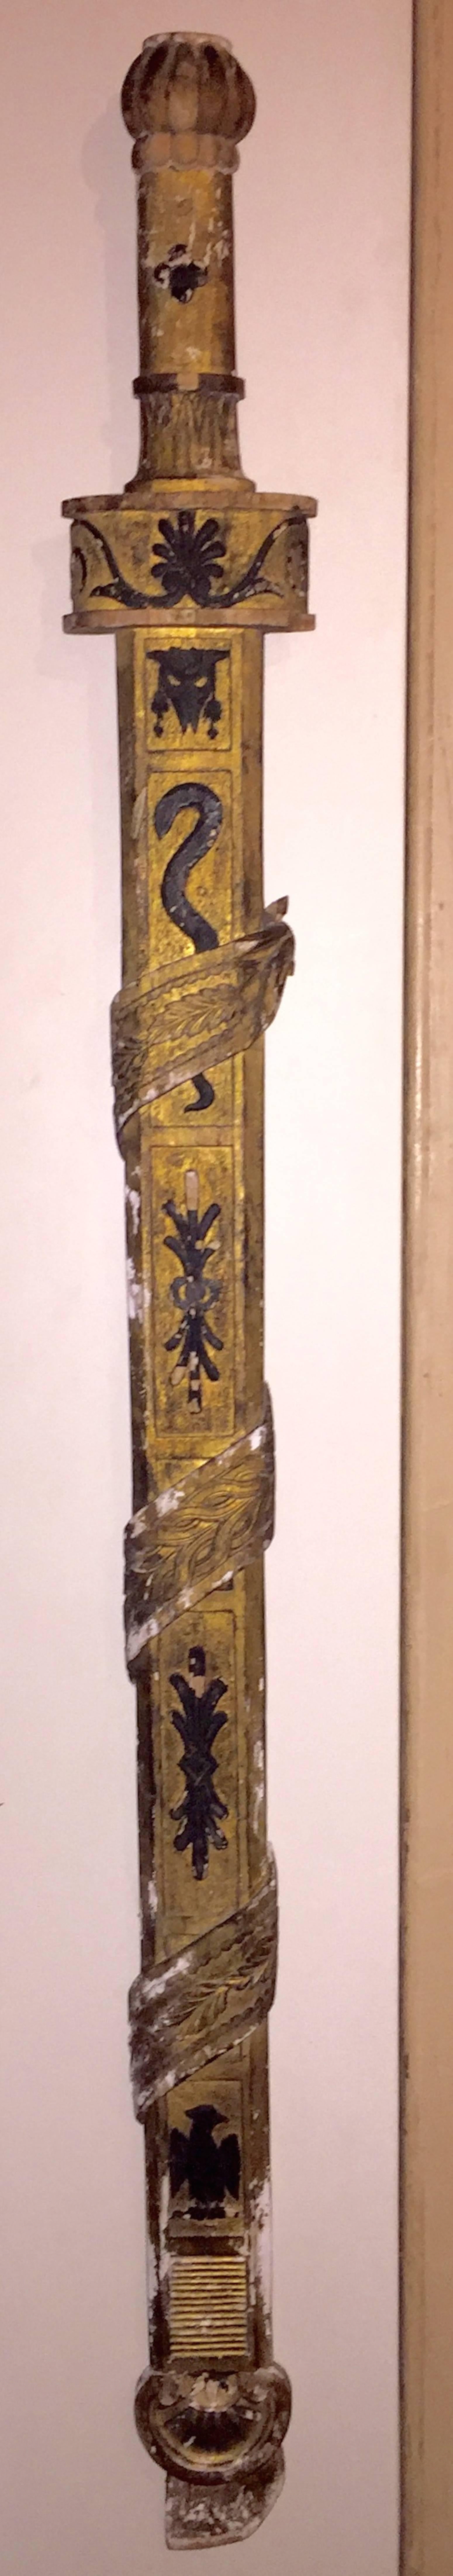 18th Century Italian Neoclassical Gilt and Painted Decorative Wood Sword For Sale 2